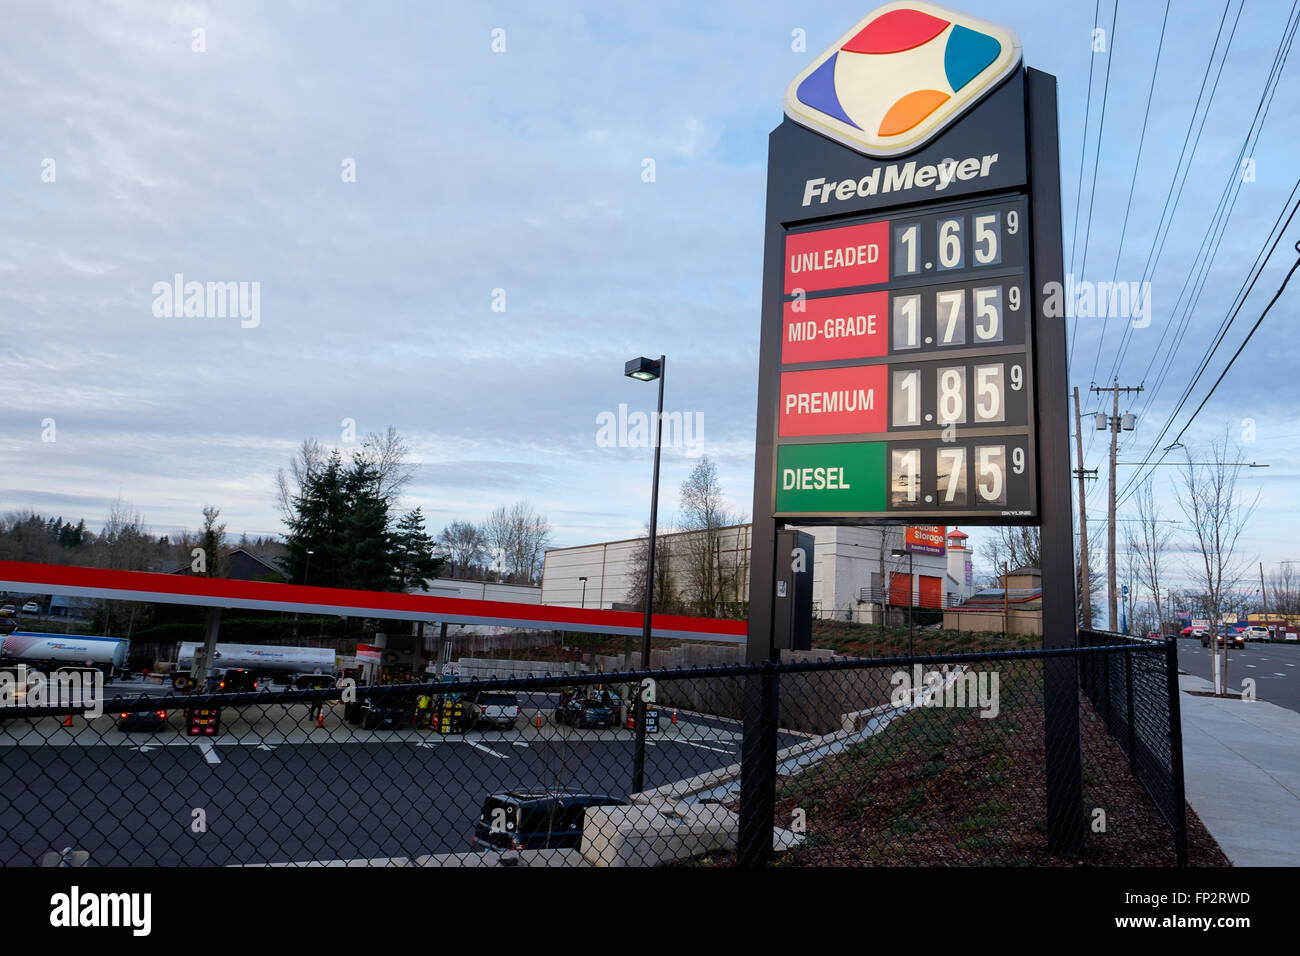 PORTLAND, OR - FEBRUARY 27, 2016: Low gasoline prices shown on a sign at a Fred Meyer gas station in Portland. Stock Photo